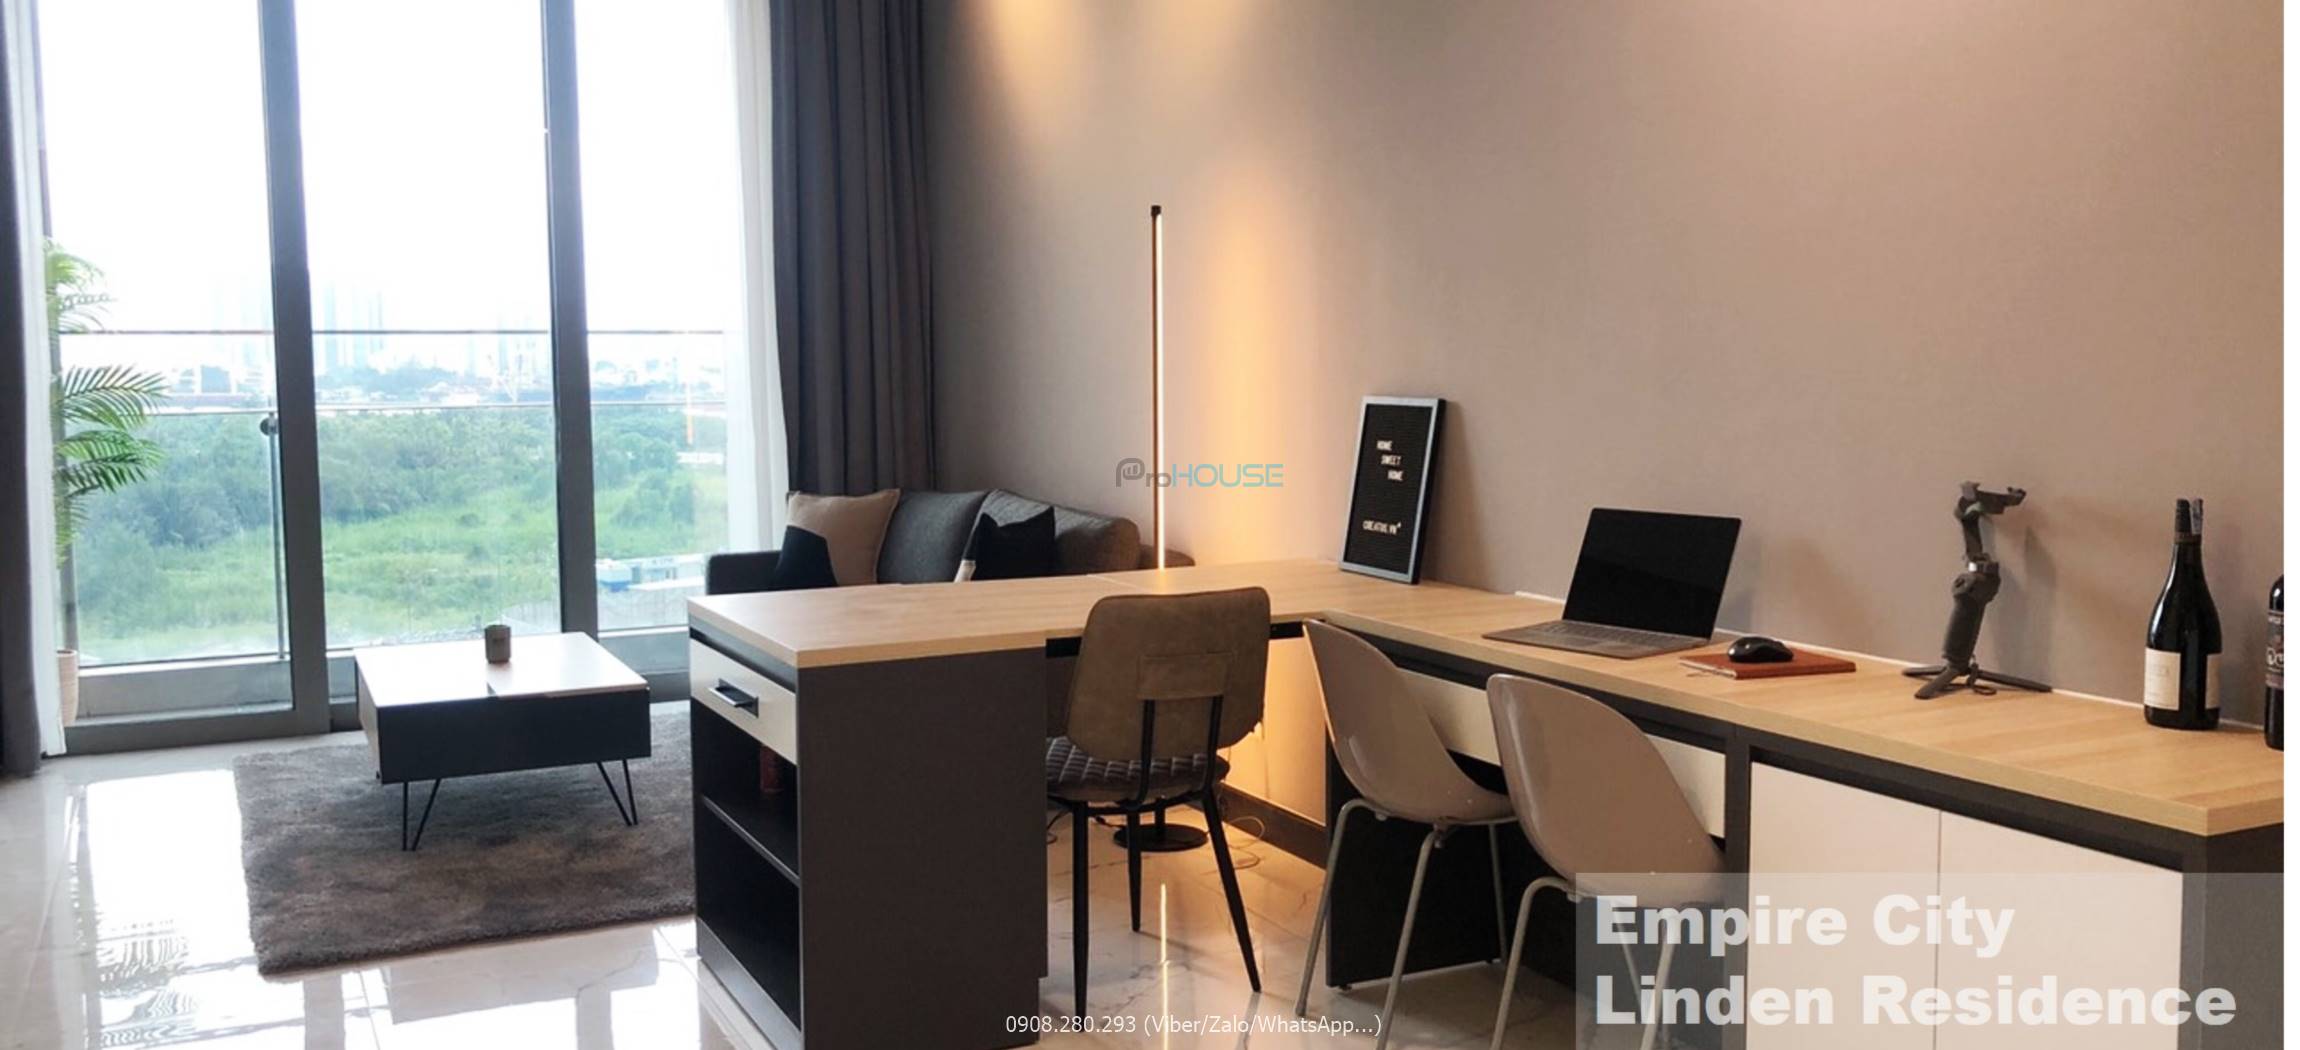 Low rental but beautiful apartment in Empire City